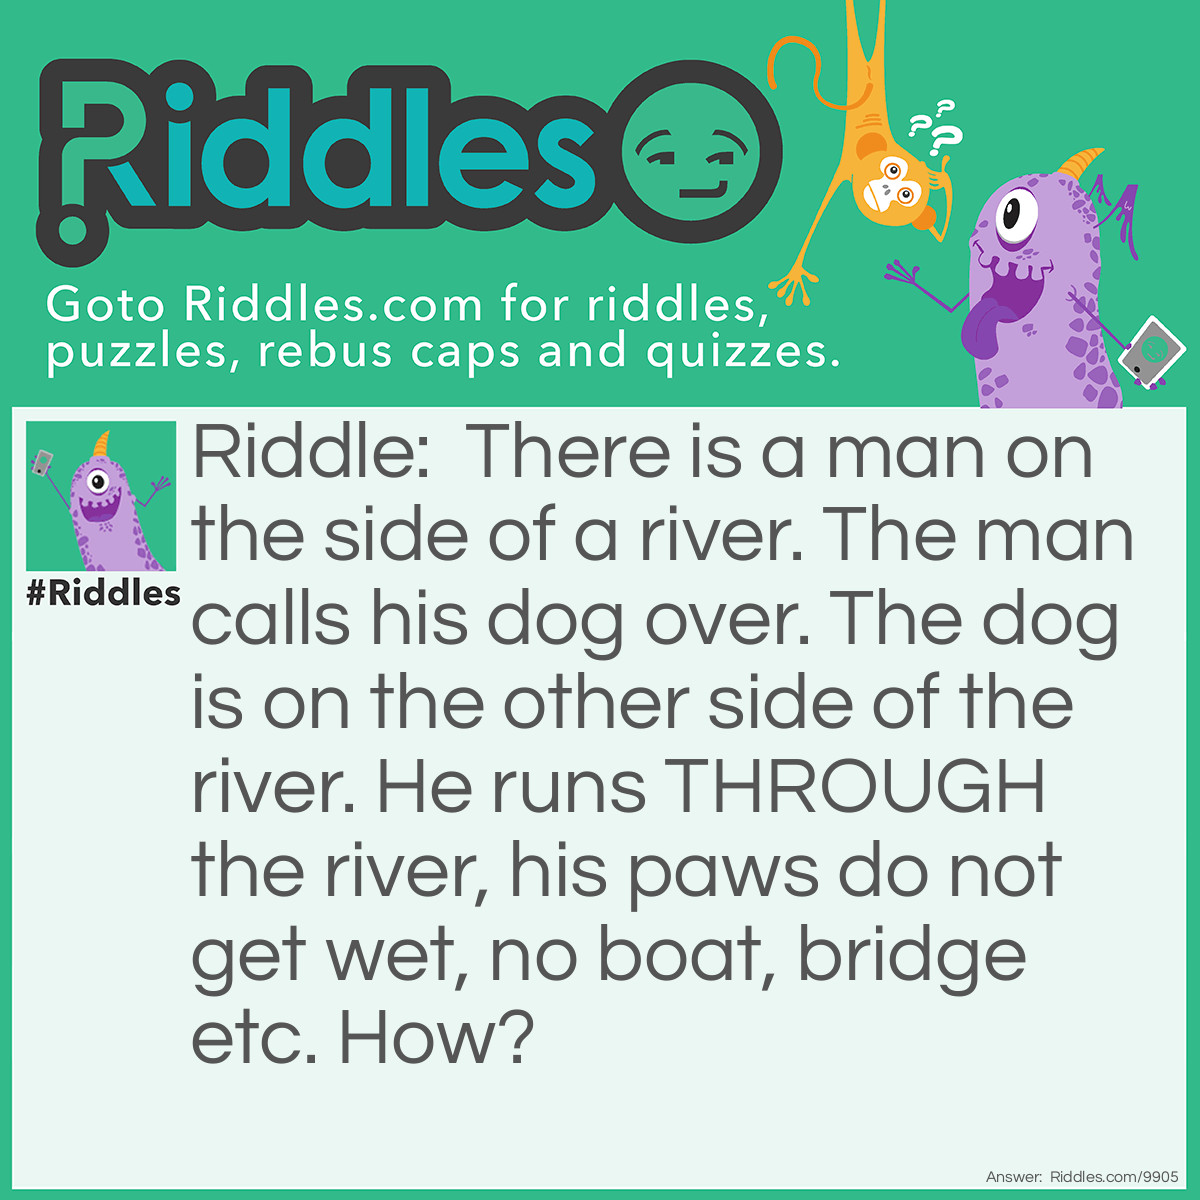 Riddle: There is a man on the side of a river. The man calls his dog over. The dog is on the other side of the river. He runs THROUGH the river, his paws do not get wet, no boat, bridge etc. How? Answer: The river was frozen.